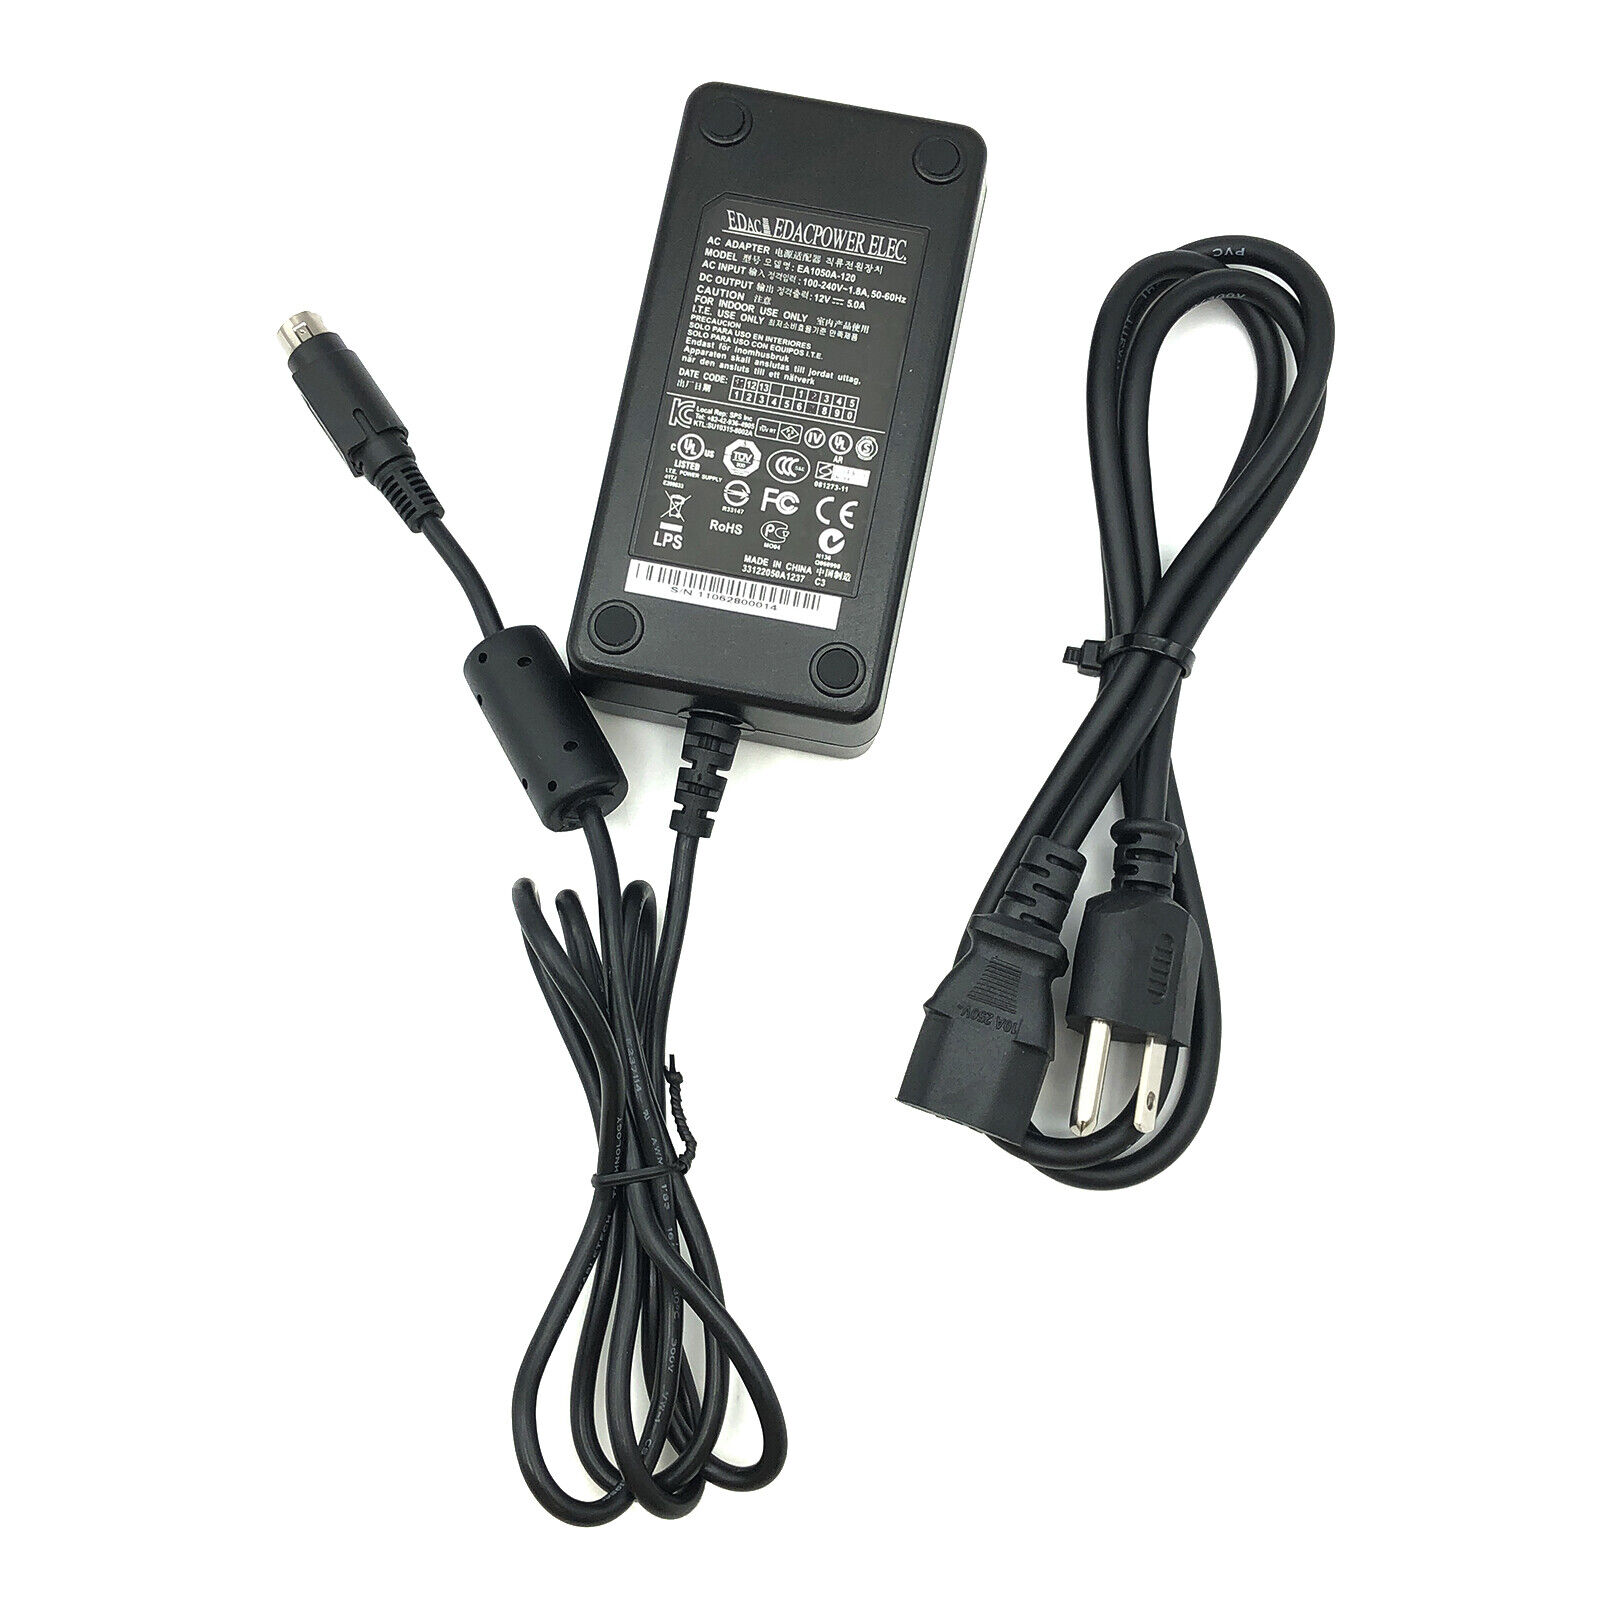 Genuine 4 Pin Edac AC/DC Adapter EA1050A-120 Power Supply 12V 5A w/Cord Type AC/DC Adapter Features Powered Compatible